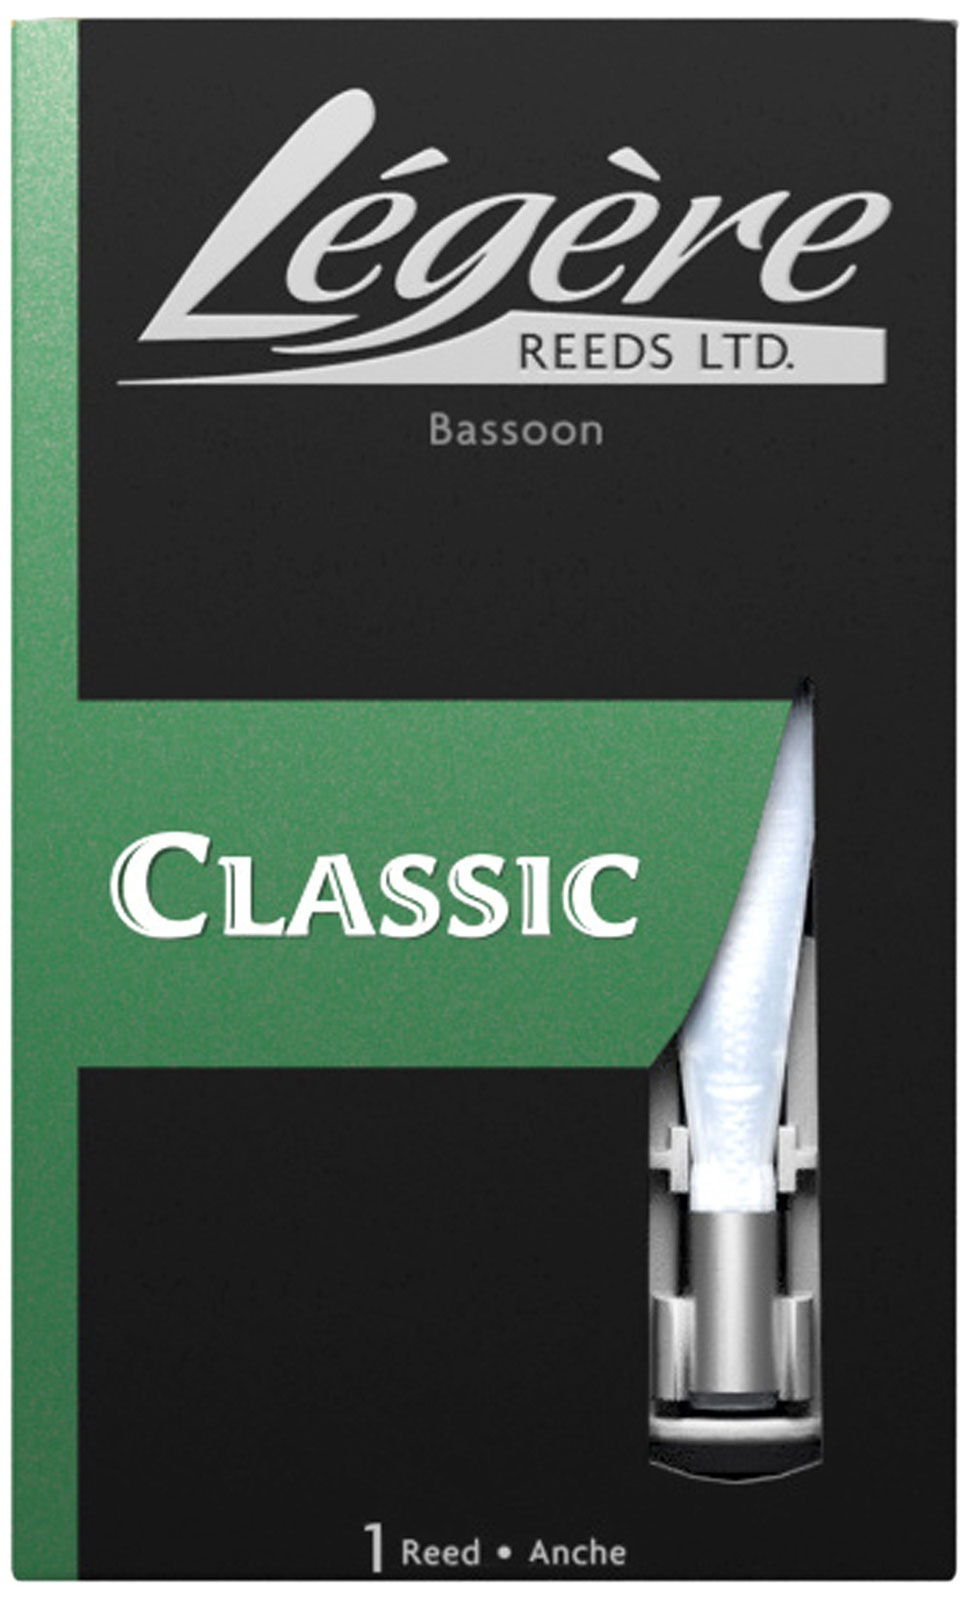 LEGERE SYNTHETIC FRENCH BASSOON REED - MEDIUM HARD